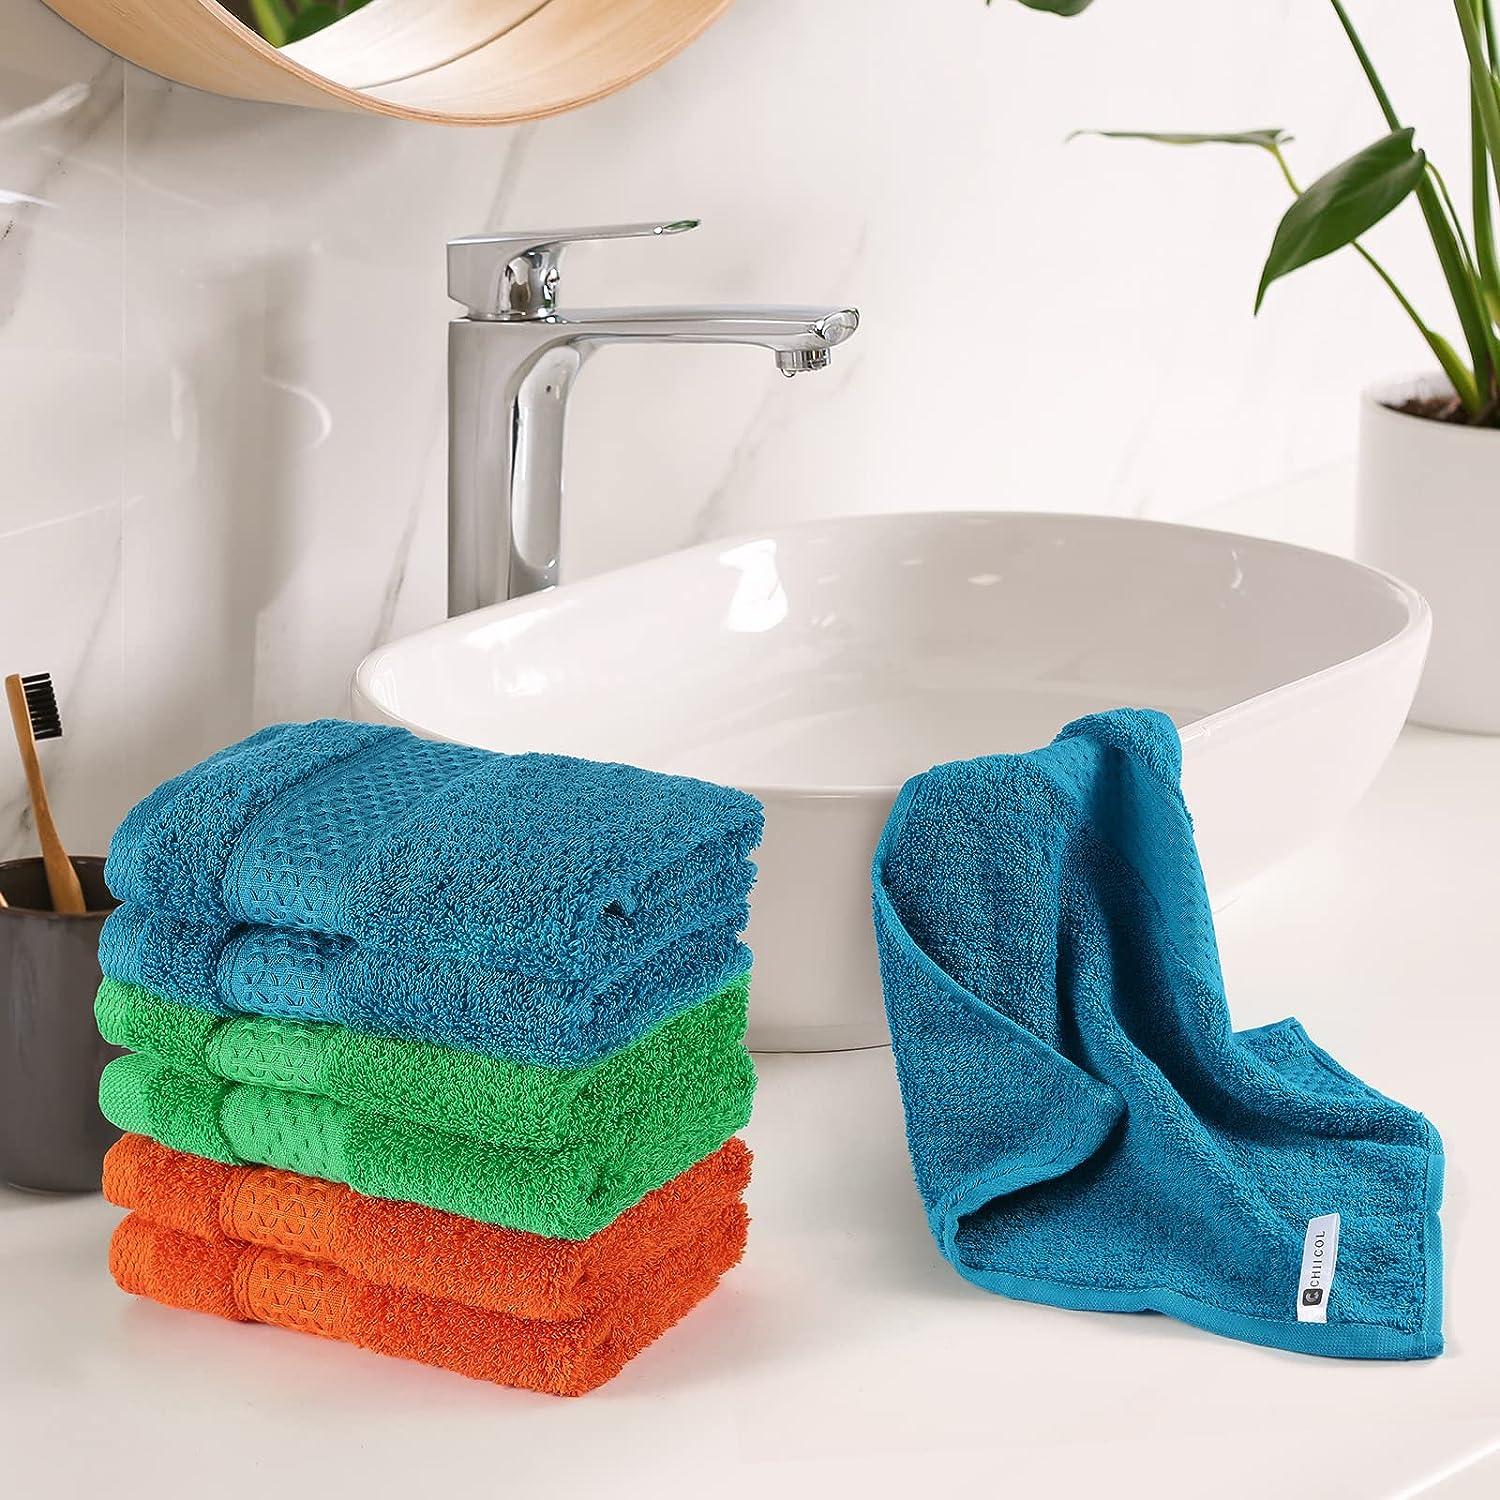 Chiicol Cotton Wash Cloths Absorbent Bath Washcloths for Body and Face -  Hotel Towels for Bathroom in